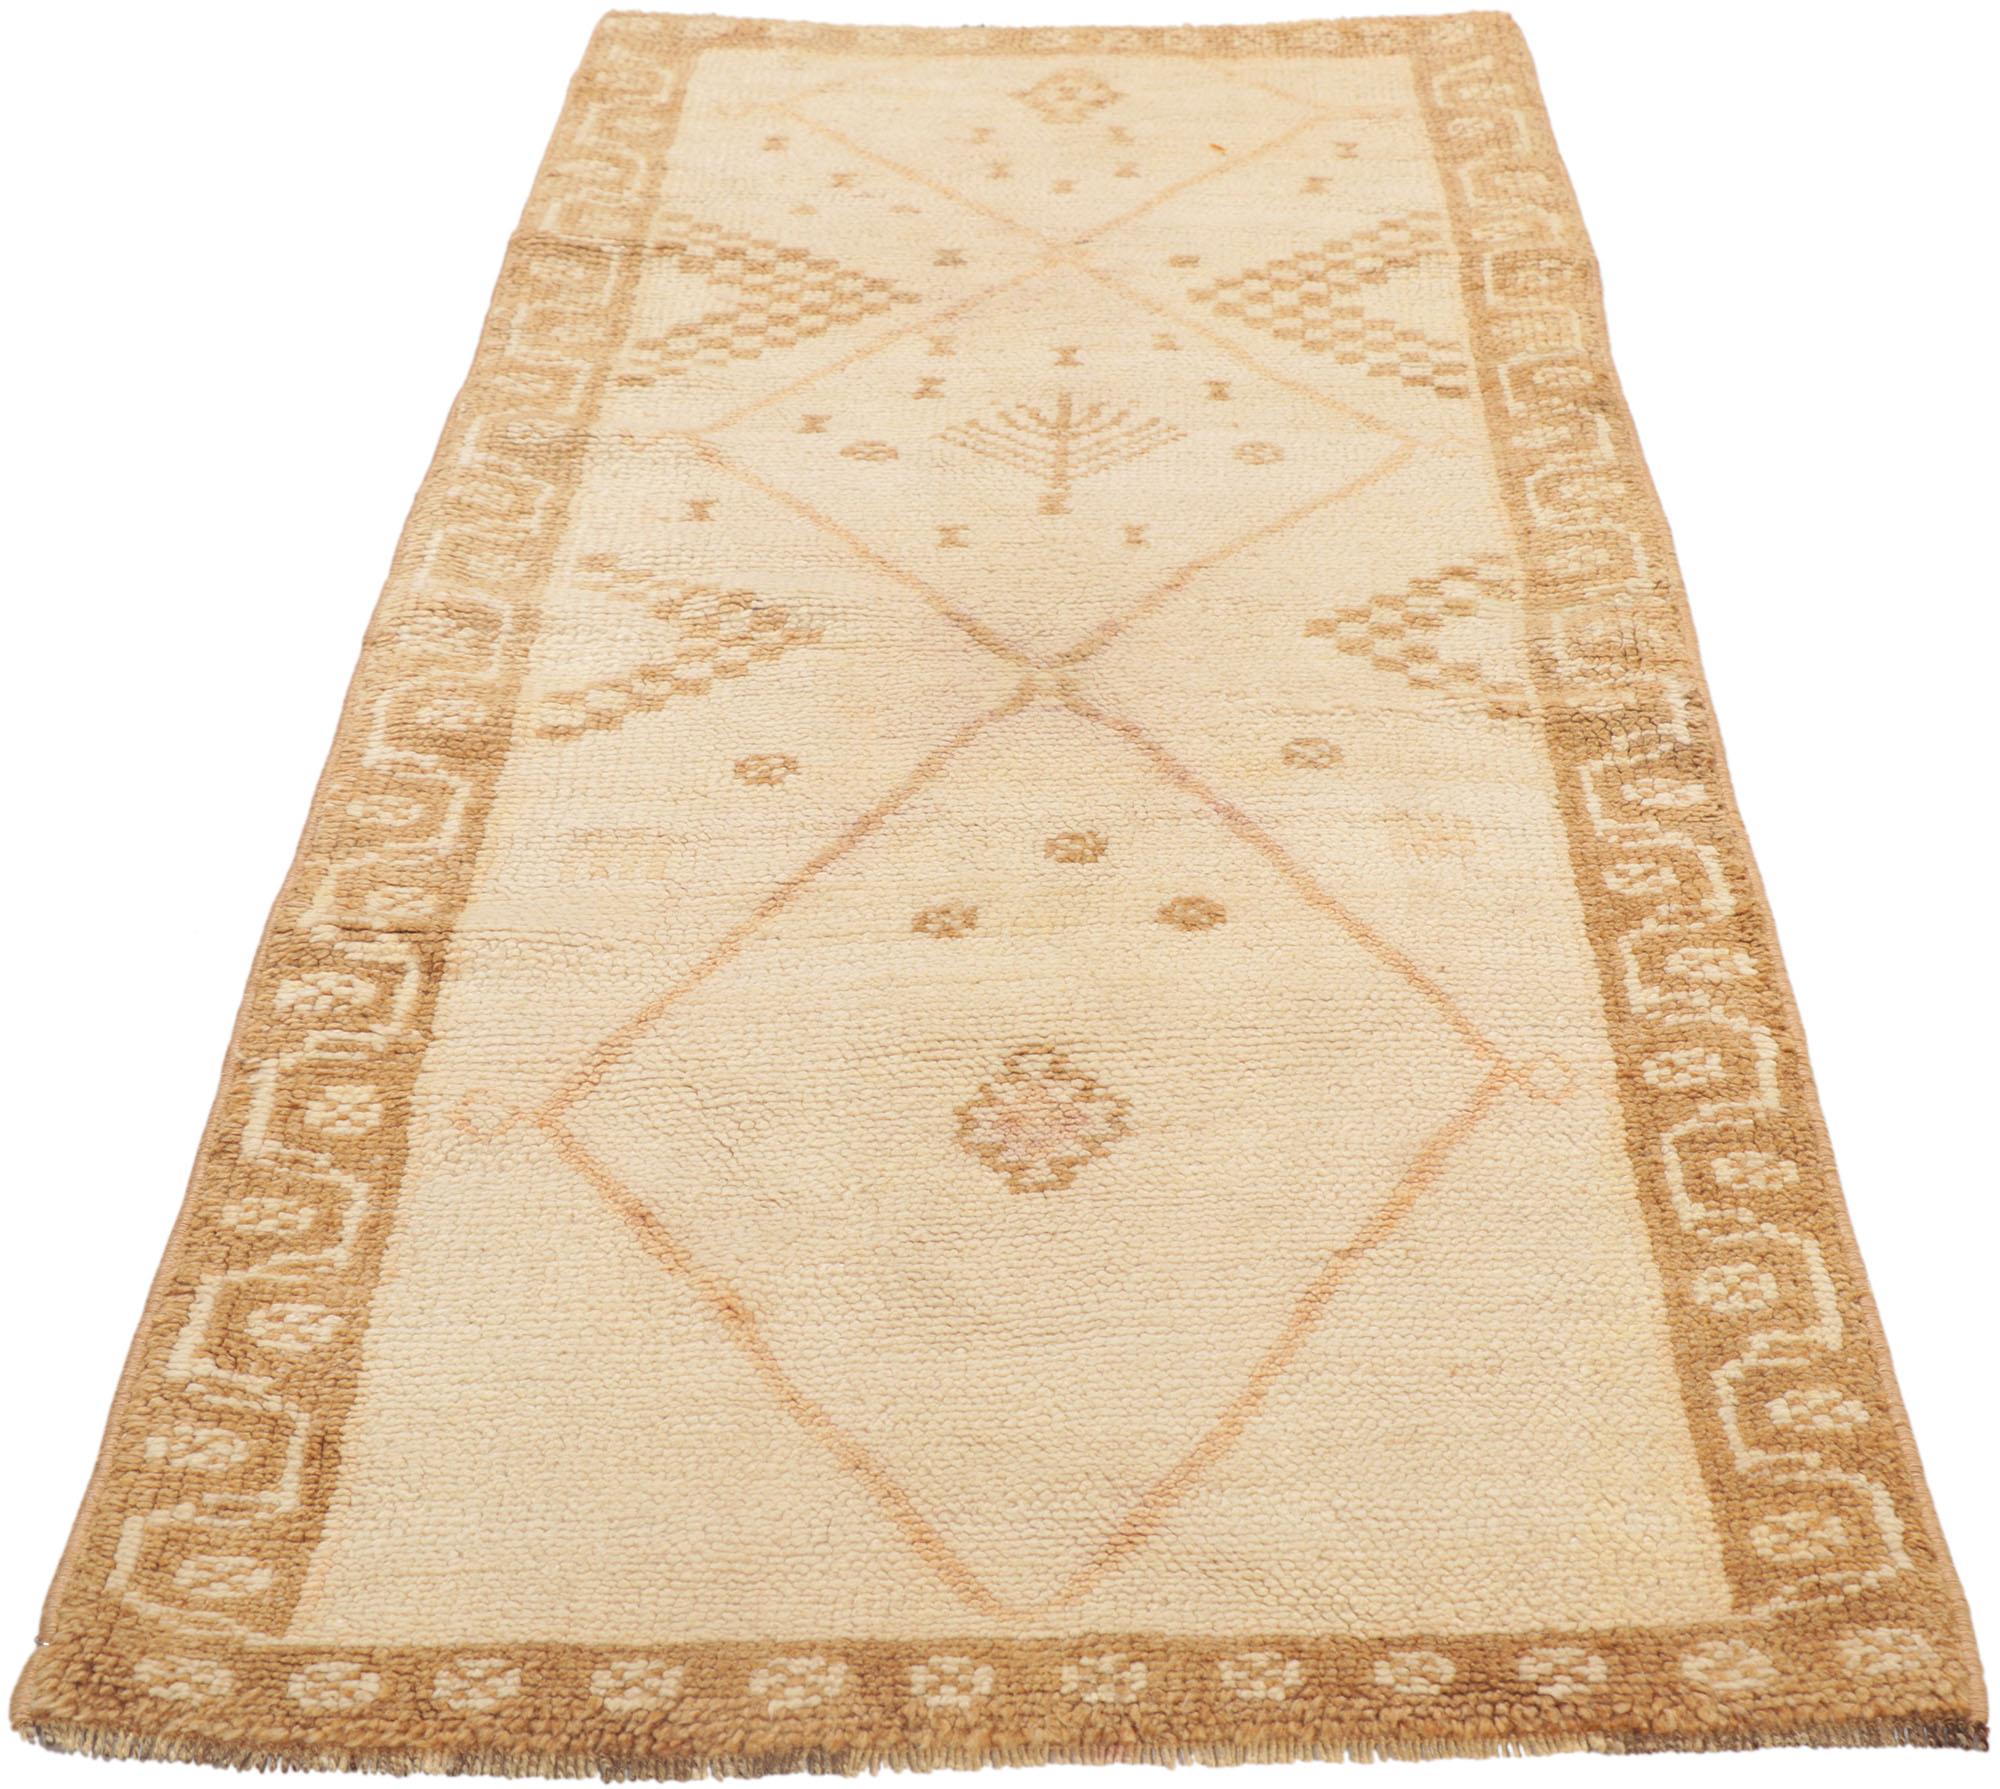 Hand-Knotted Vintage Muted Turkish Oushak Rug, Modern Southwest Meets Windswept Appeal For Sale